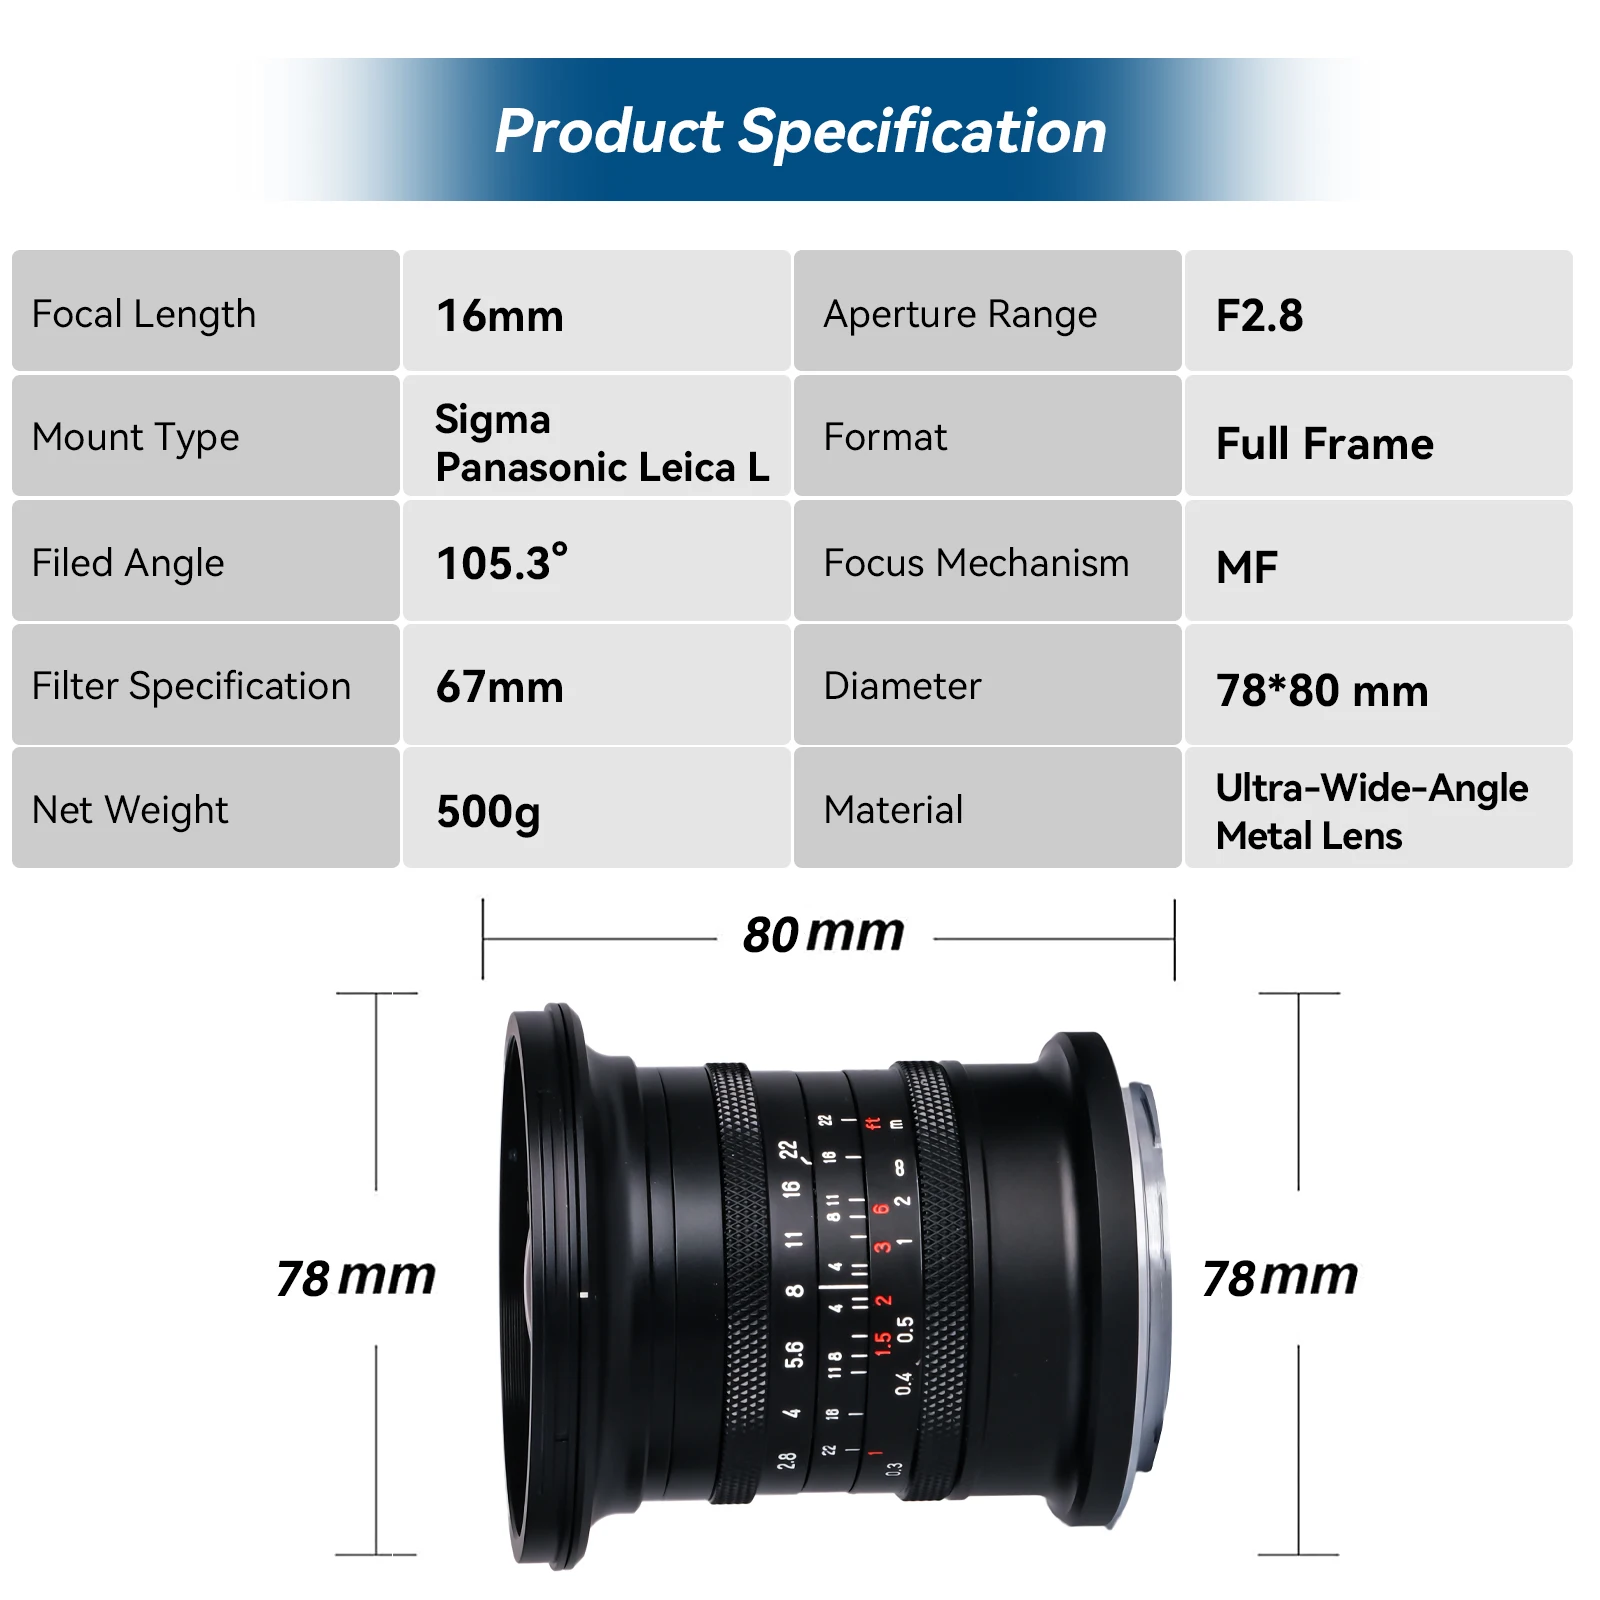 Brightin Star 16mm F2.8 Full Frame Ultra Wide Angle Manual Focus Mirrorless Camera Lens for Canon Nikon Sony FUJIFILM images - 6